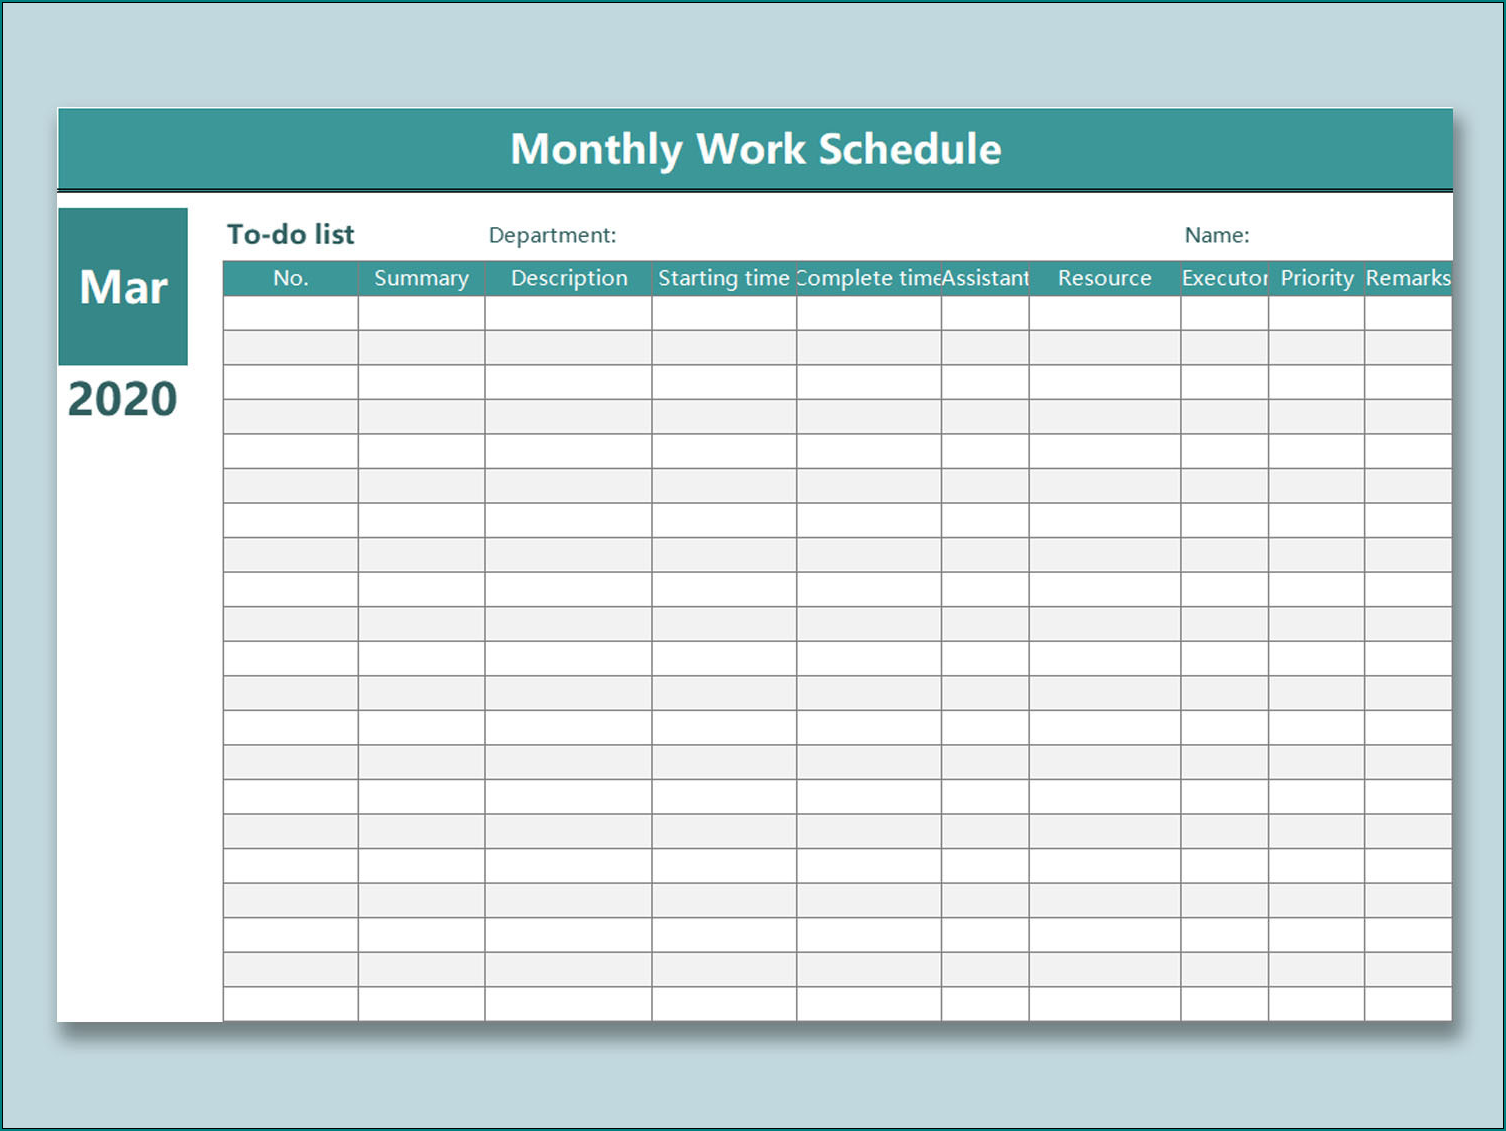 work schedule using excel template free download